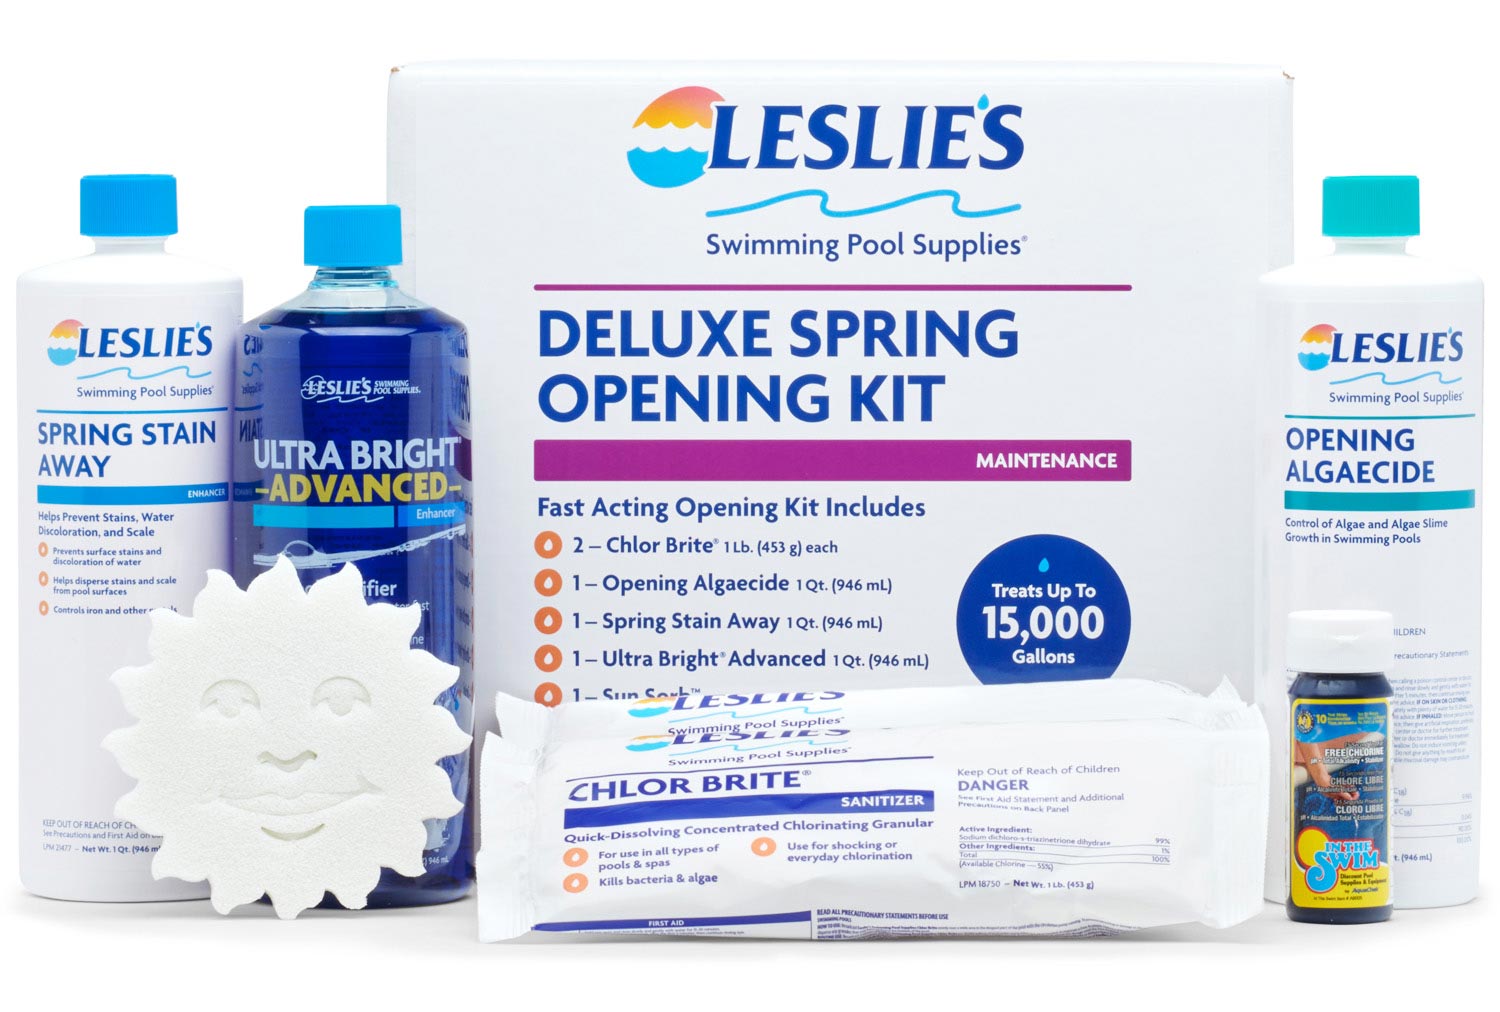 Leslie's Deluxe Spring Pool Opening Kit Contents